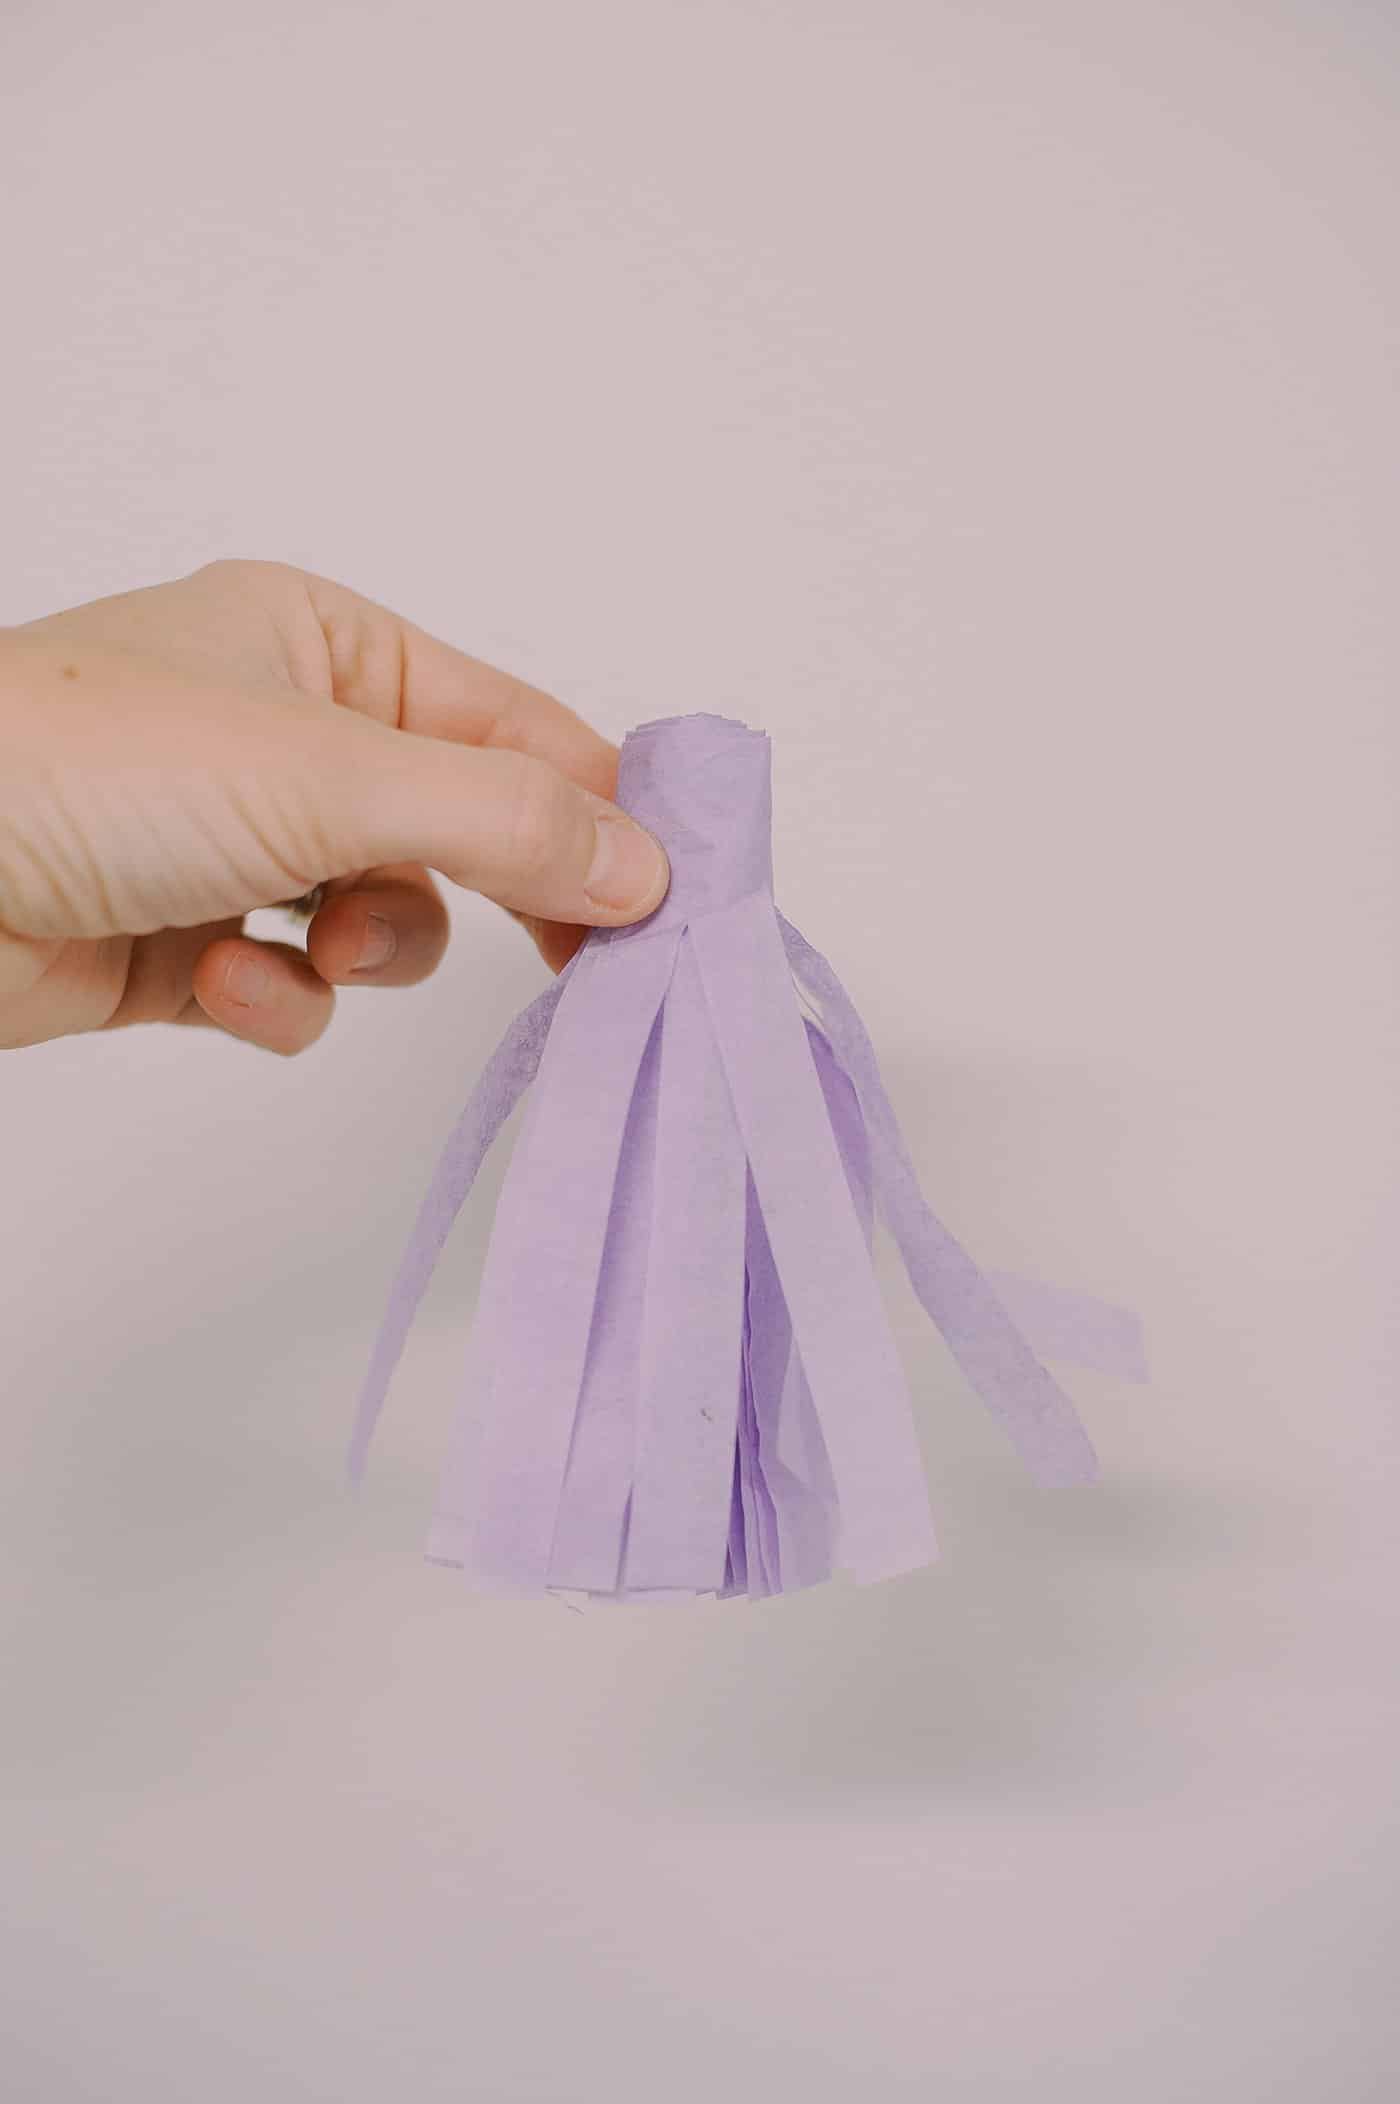 How to make a tissue paper tassel.